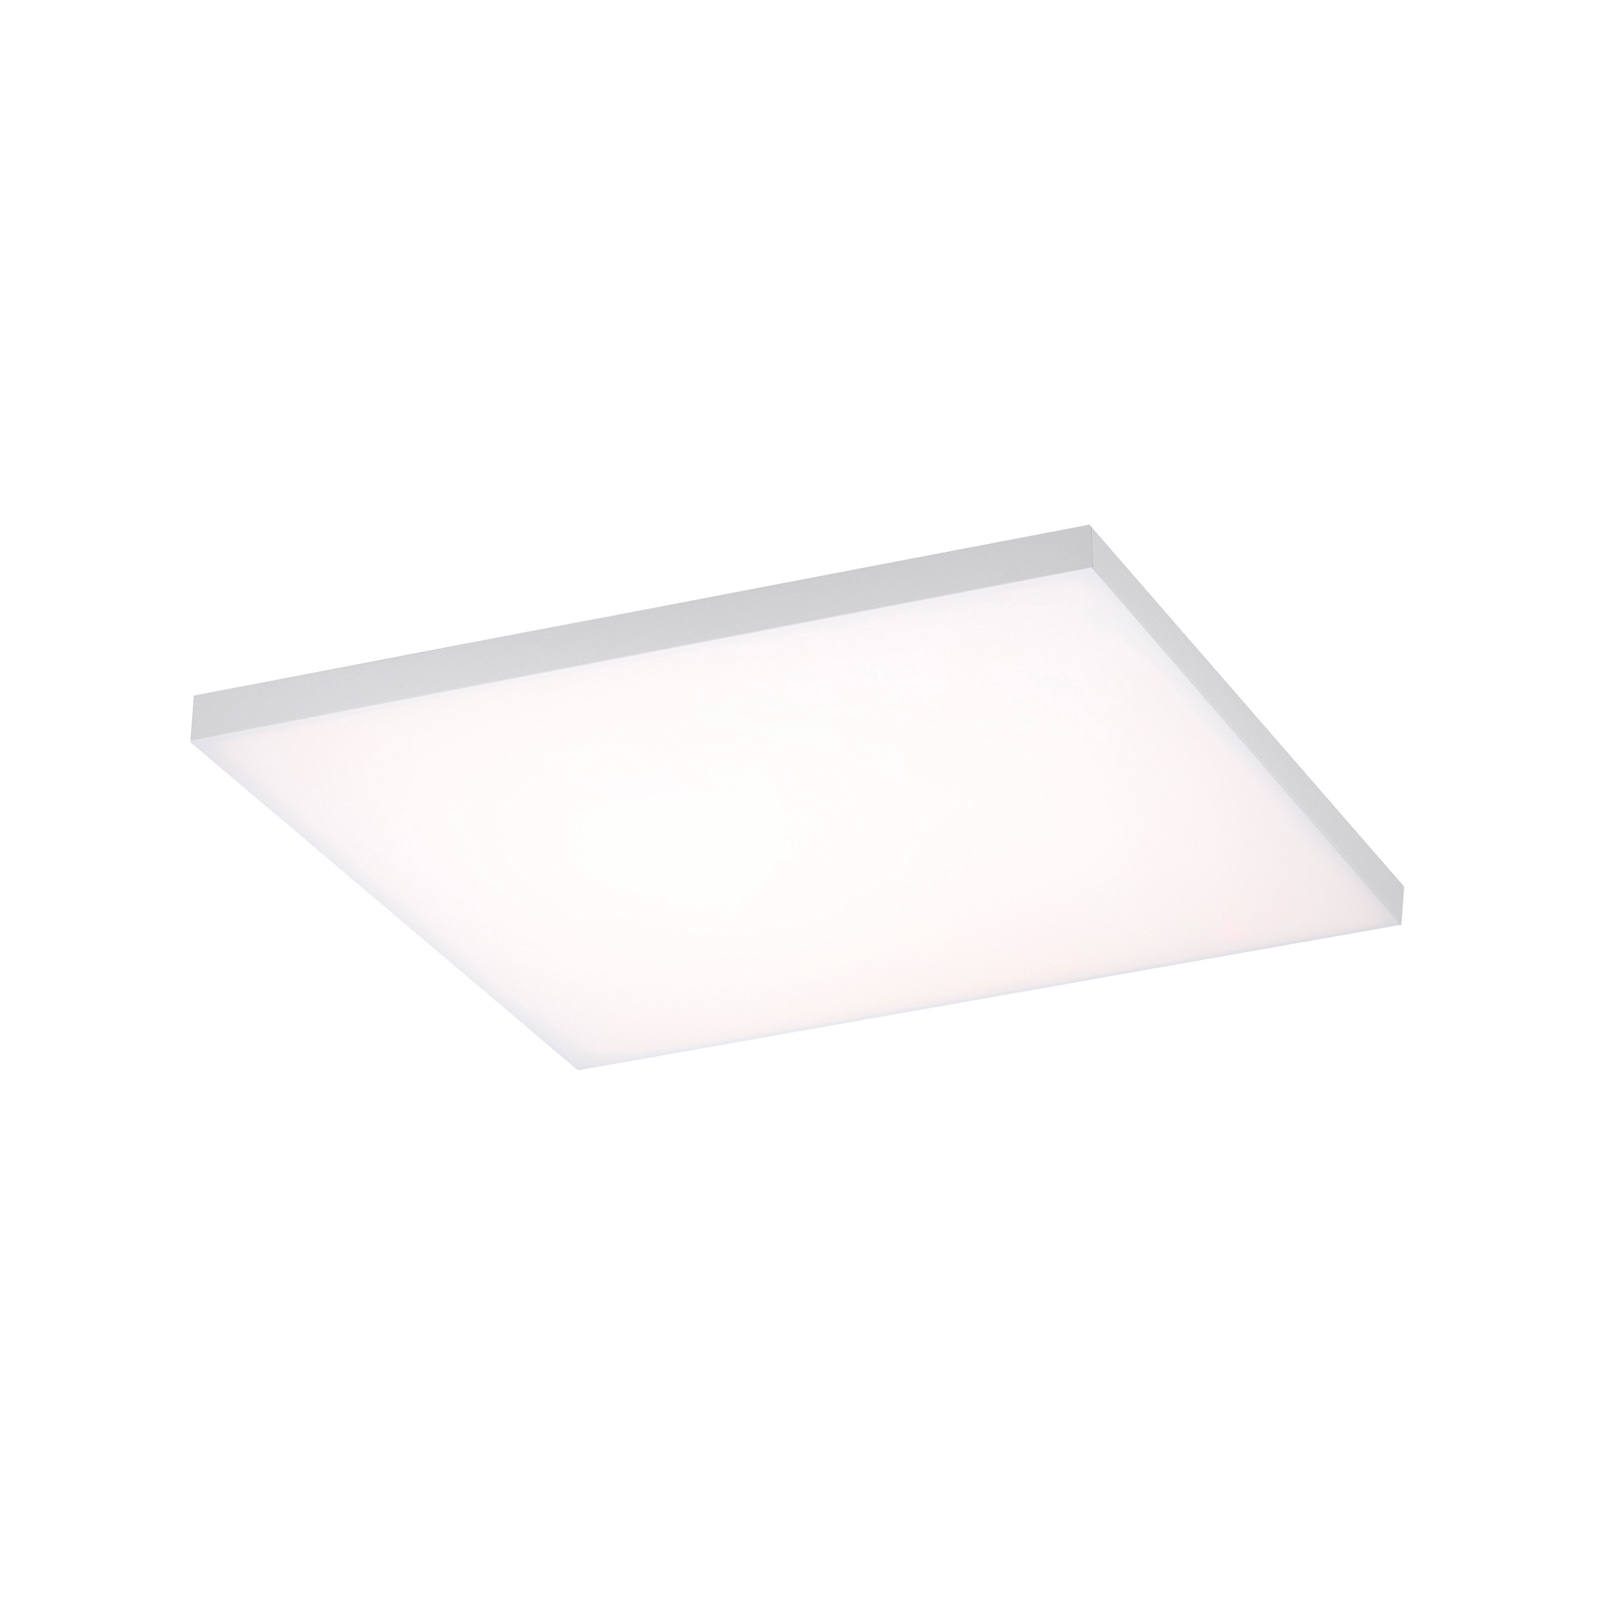 Canvas LED ceiling light, tunable white, 45 cm